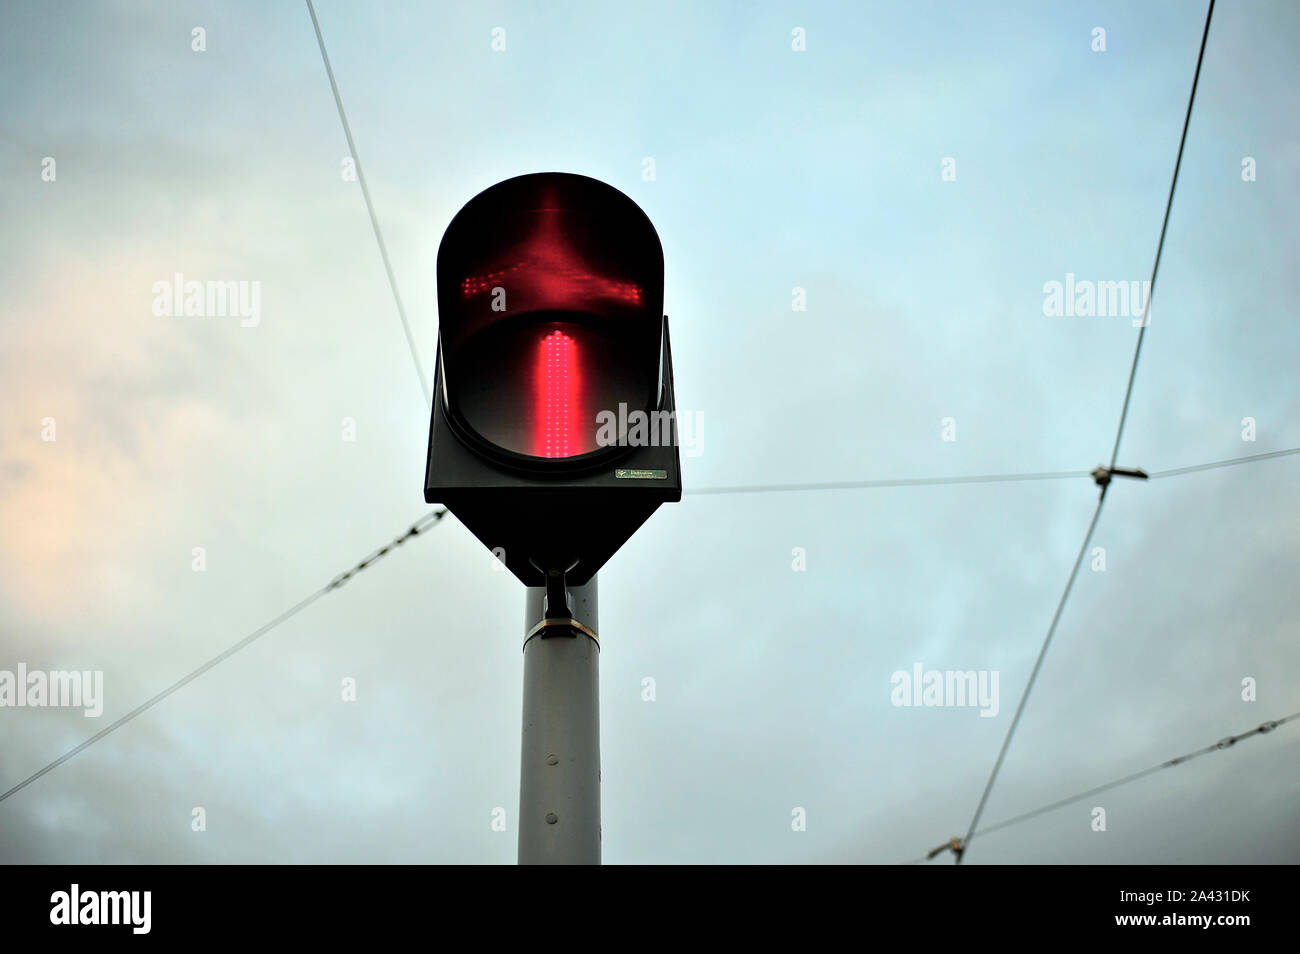 Tram signal against sky and overhead power lines at dusk in winter Stock Photo